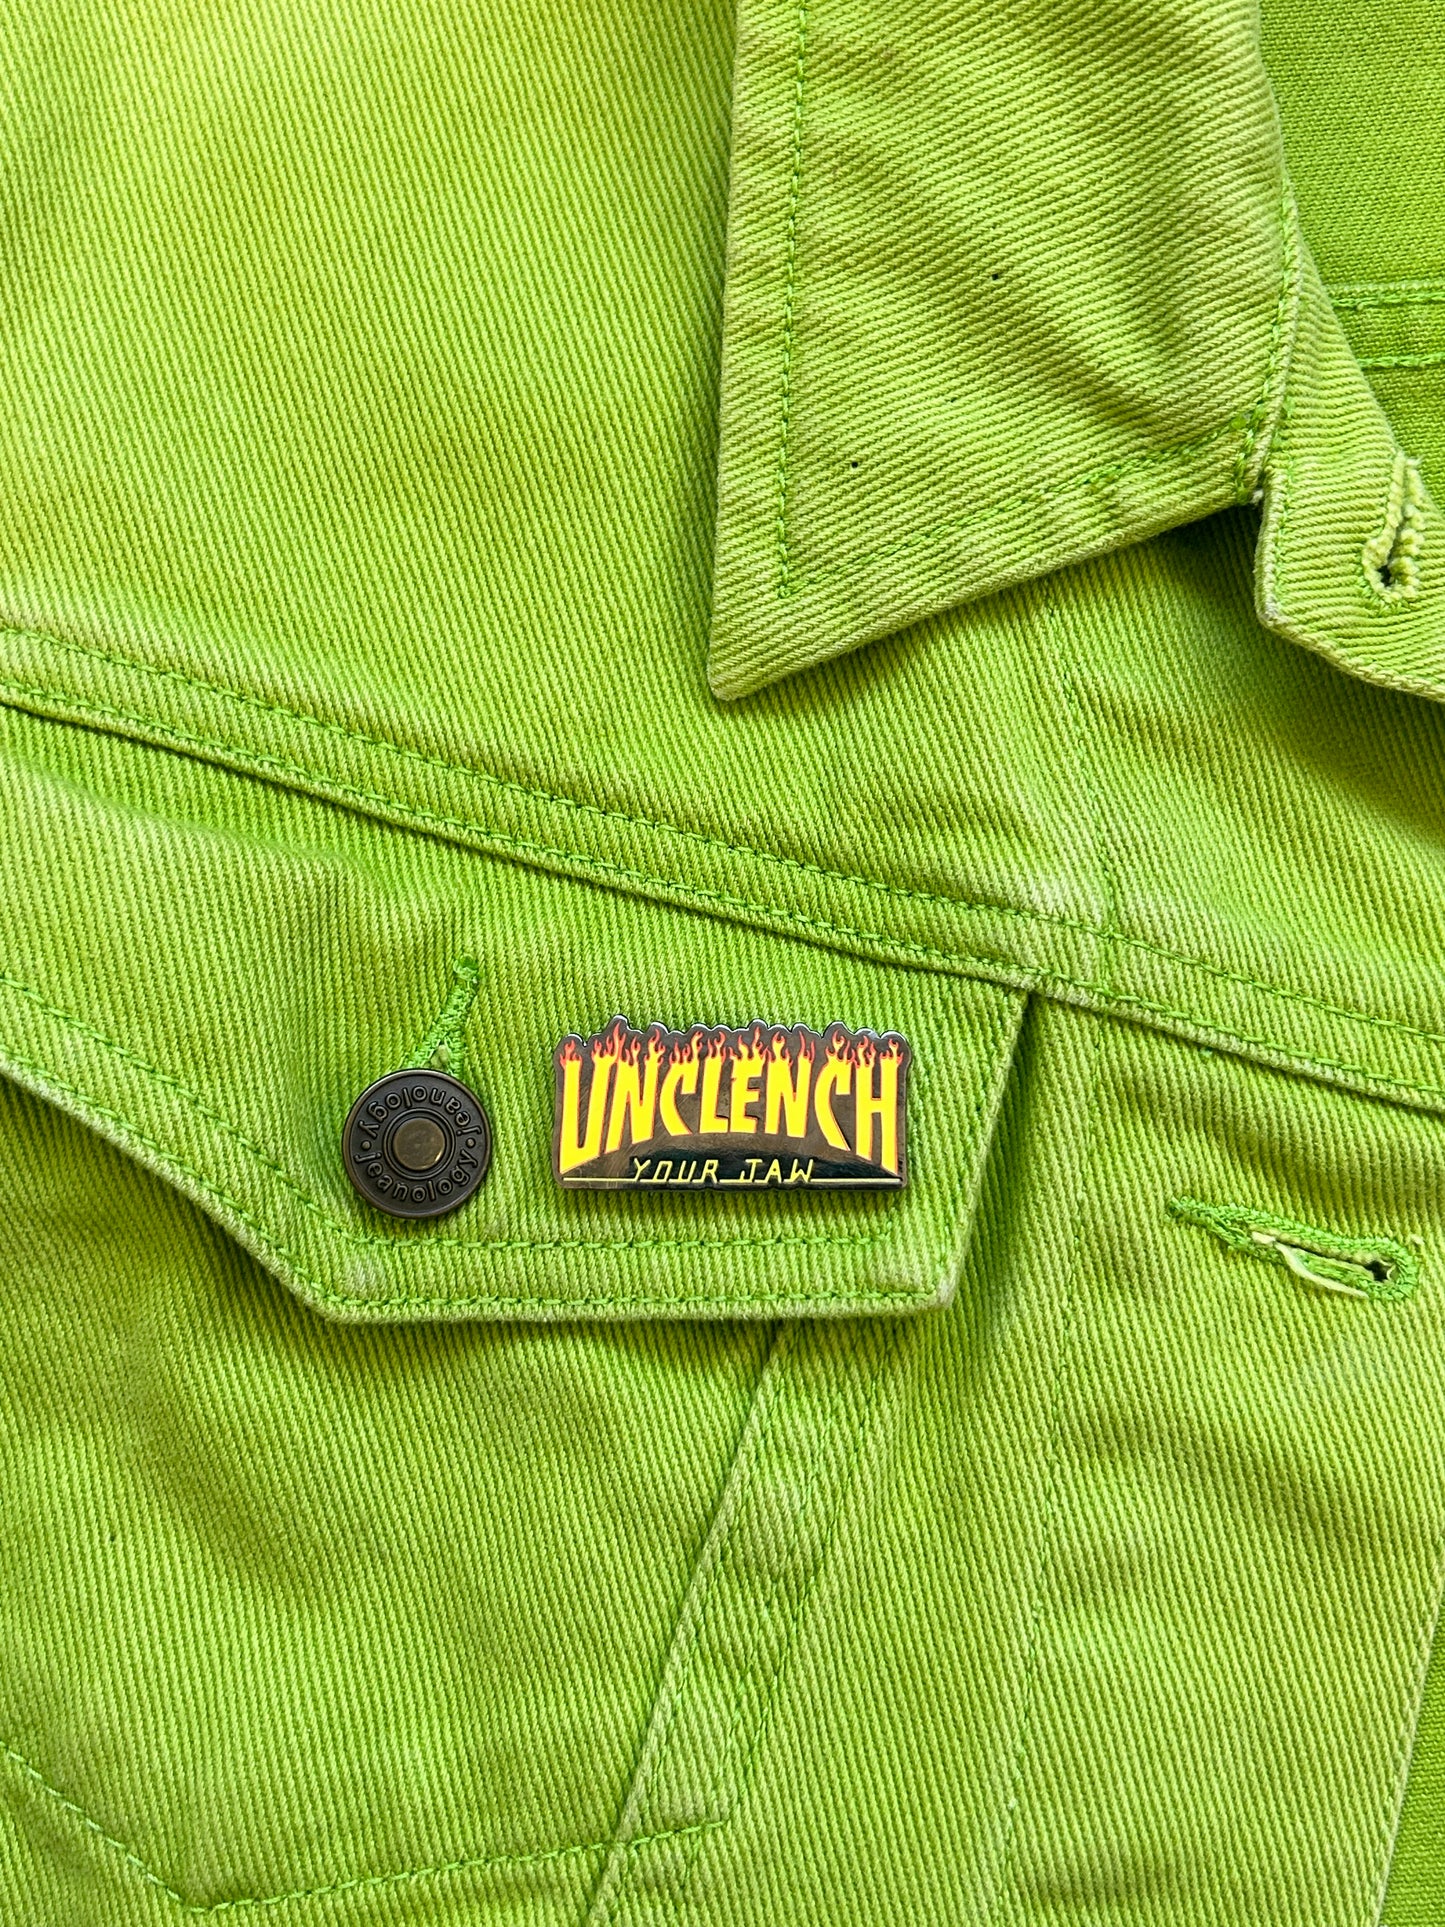 Unclench Your Jaw Enamel Pin